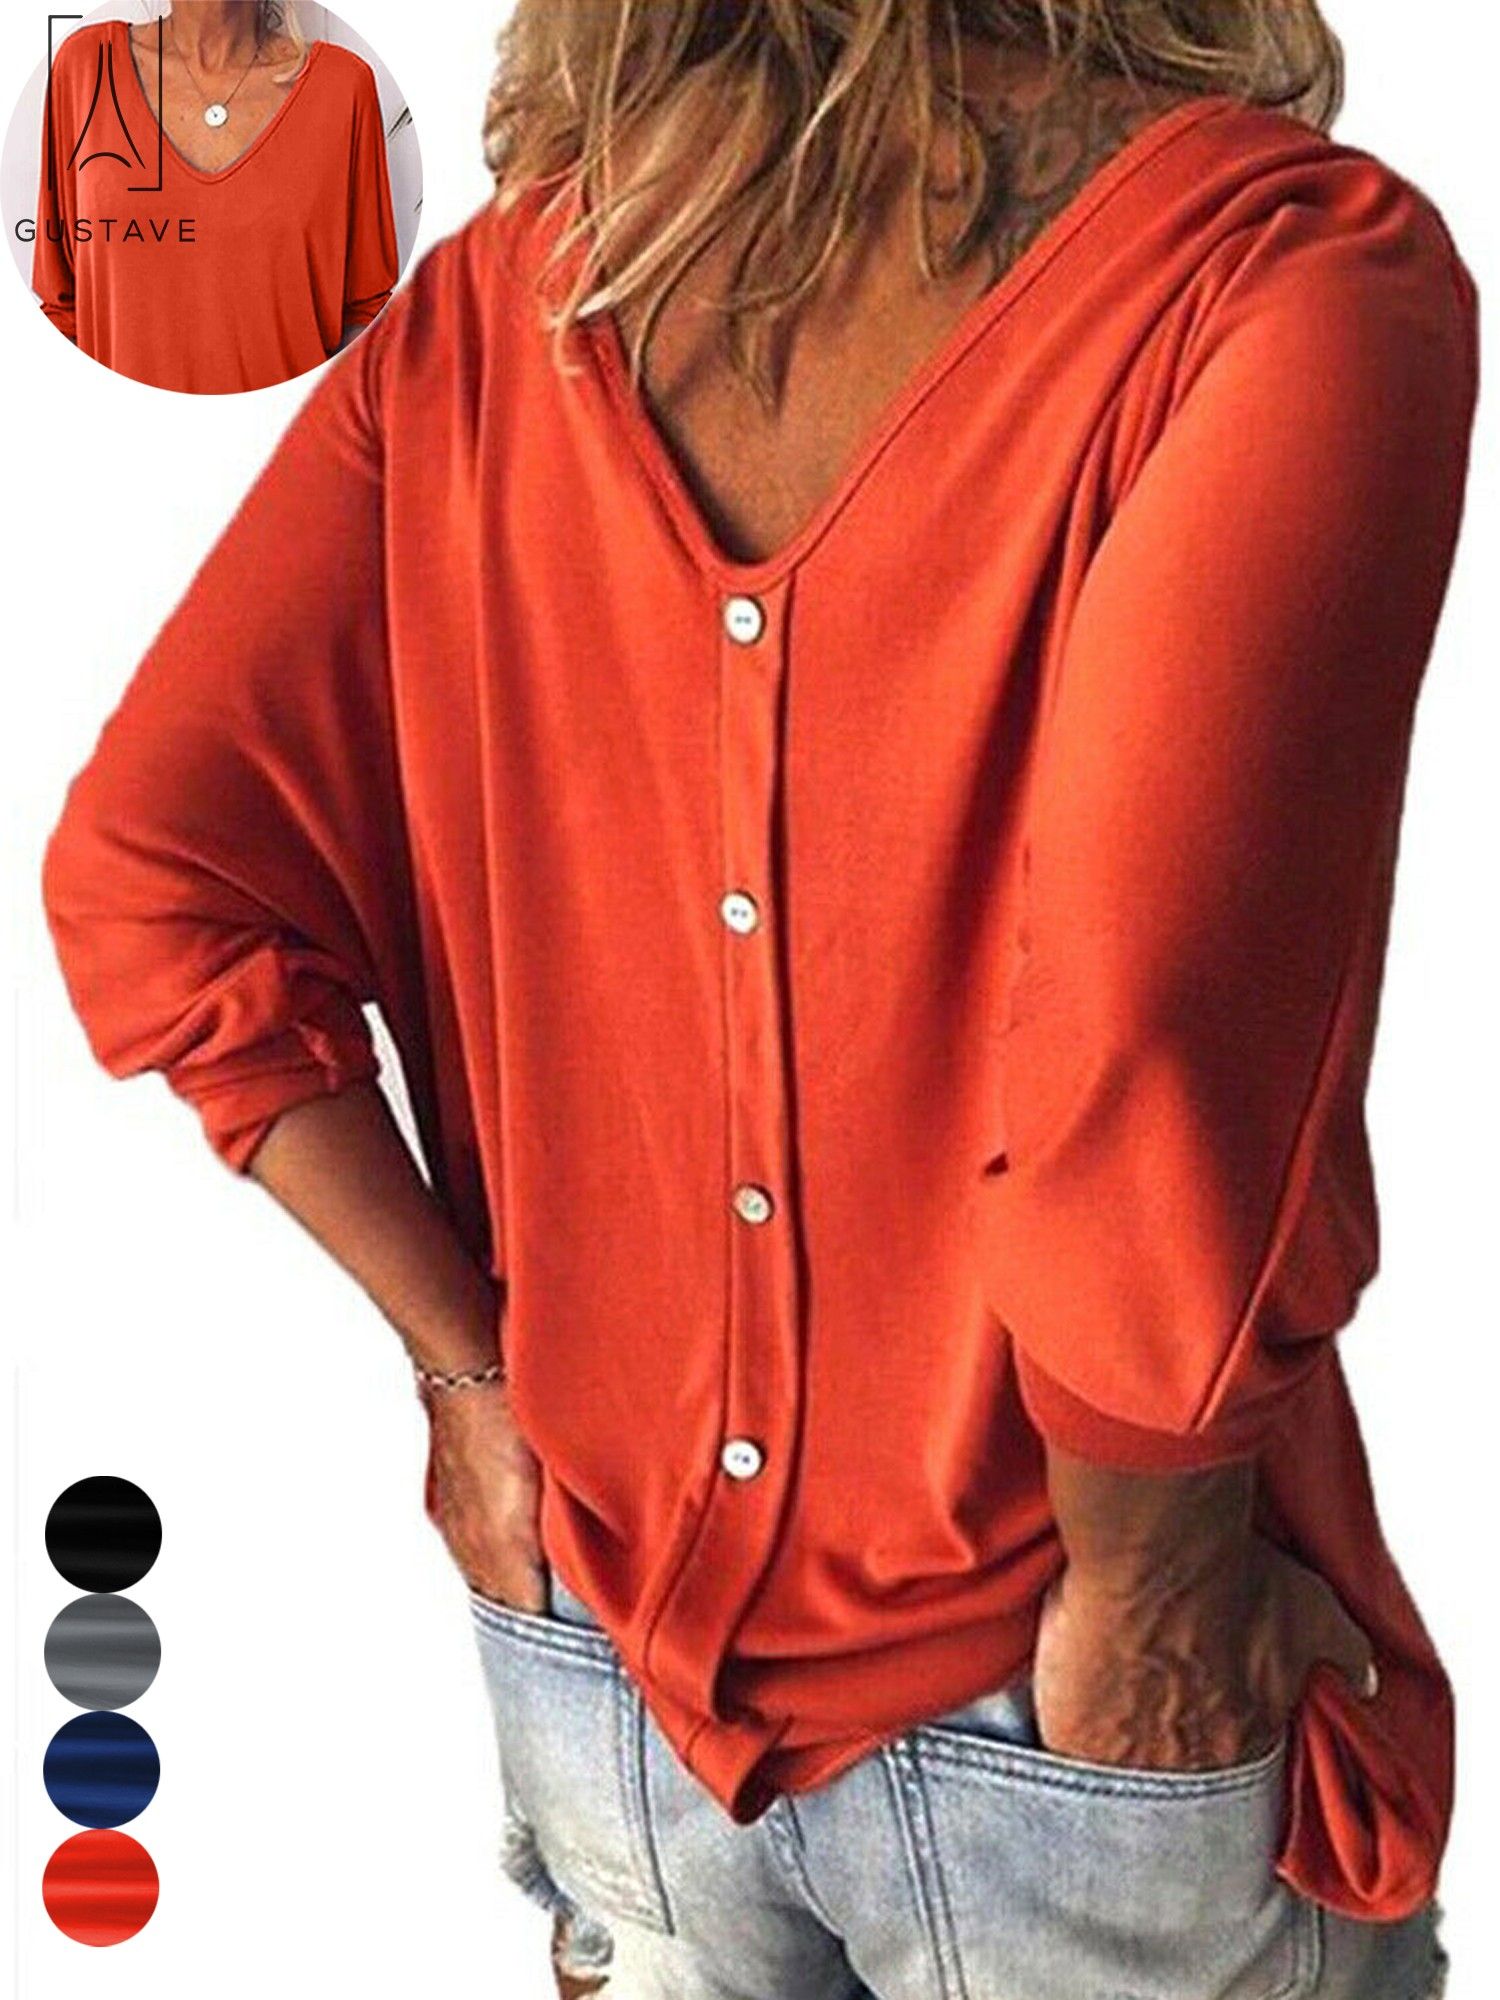 V Neck Plus Size Blouse Turn Down Collar Shirt Button Long Sleeve Crop Tops Tops for Women Casual Summer 